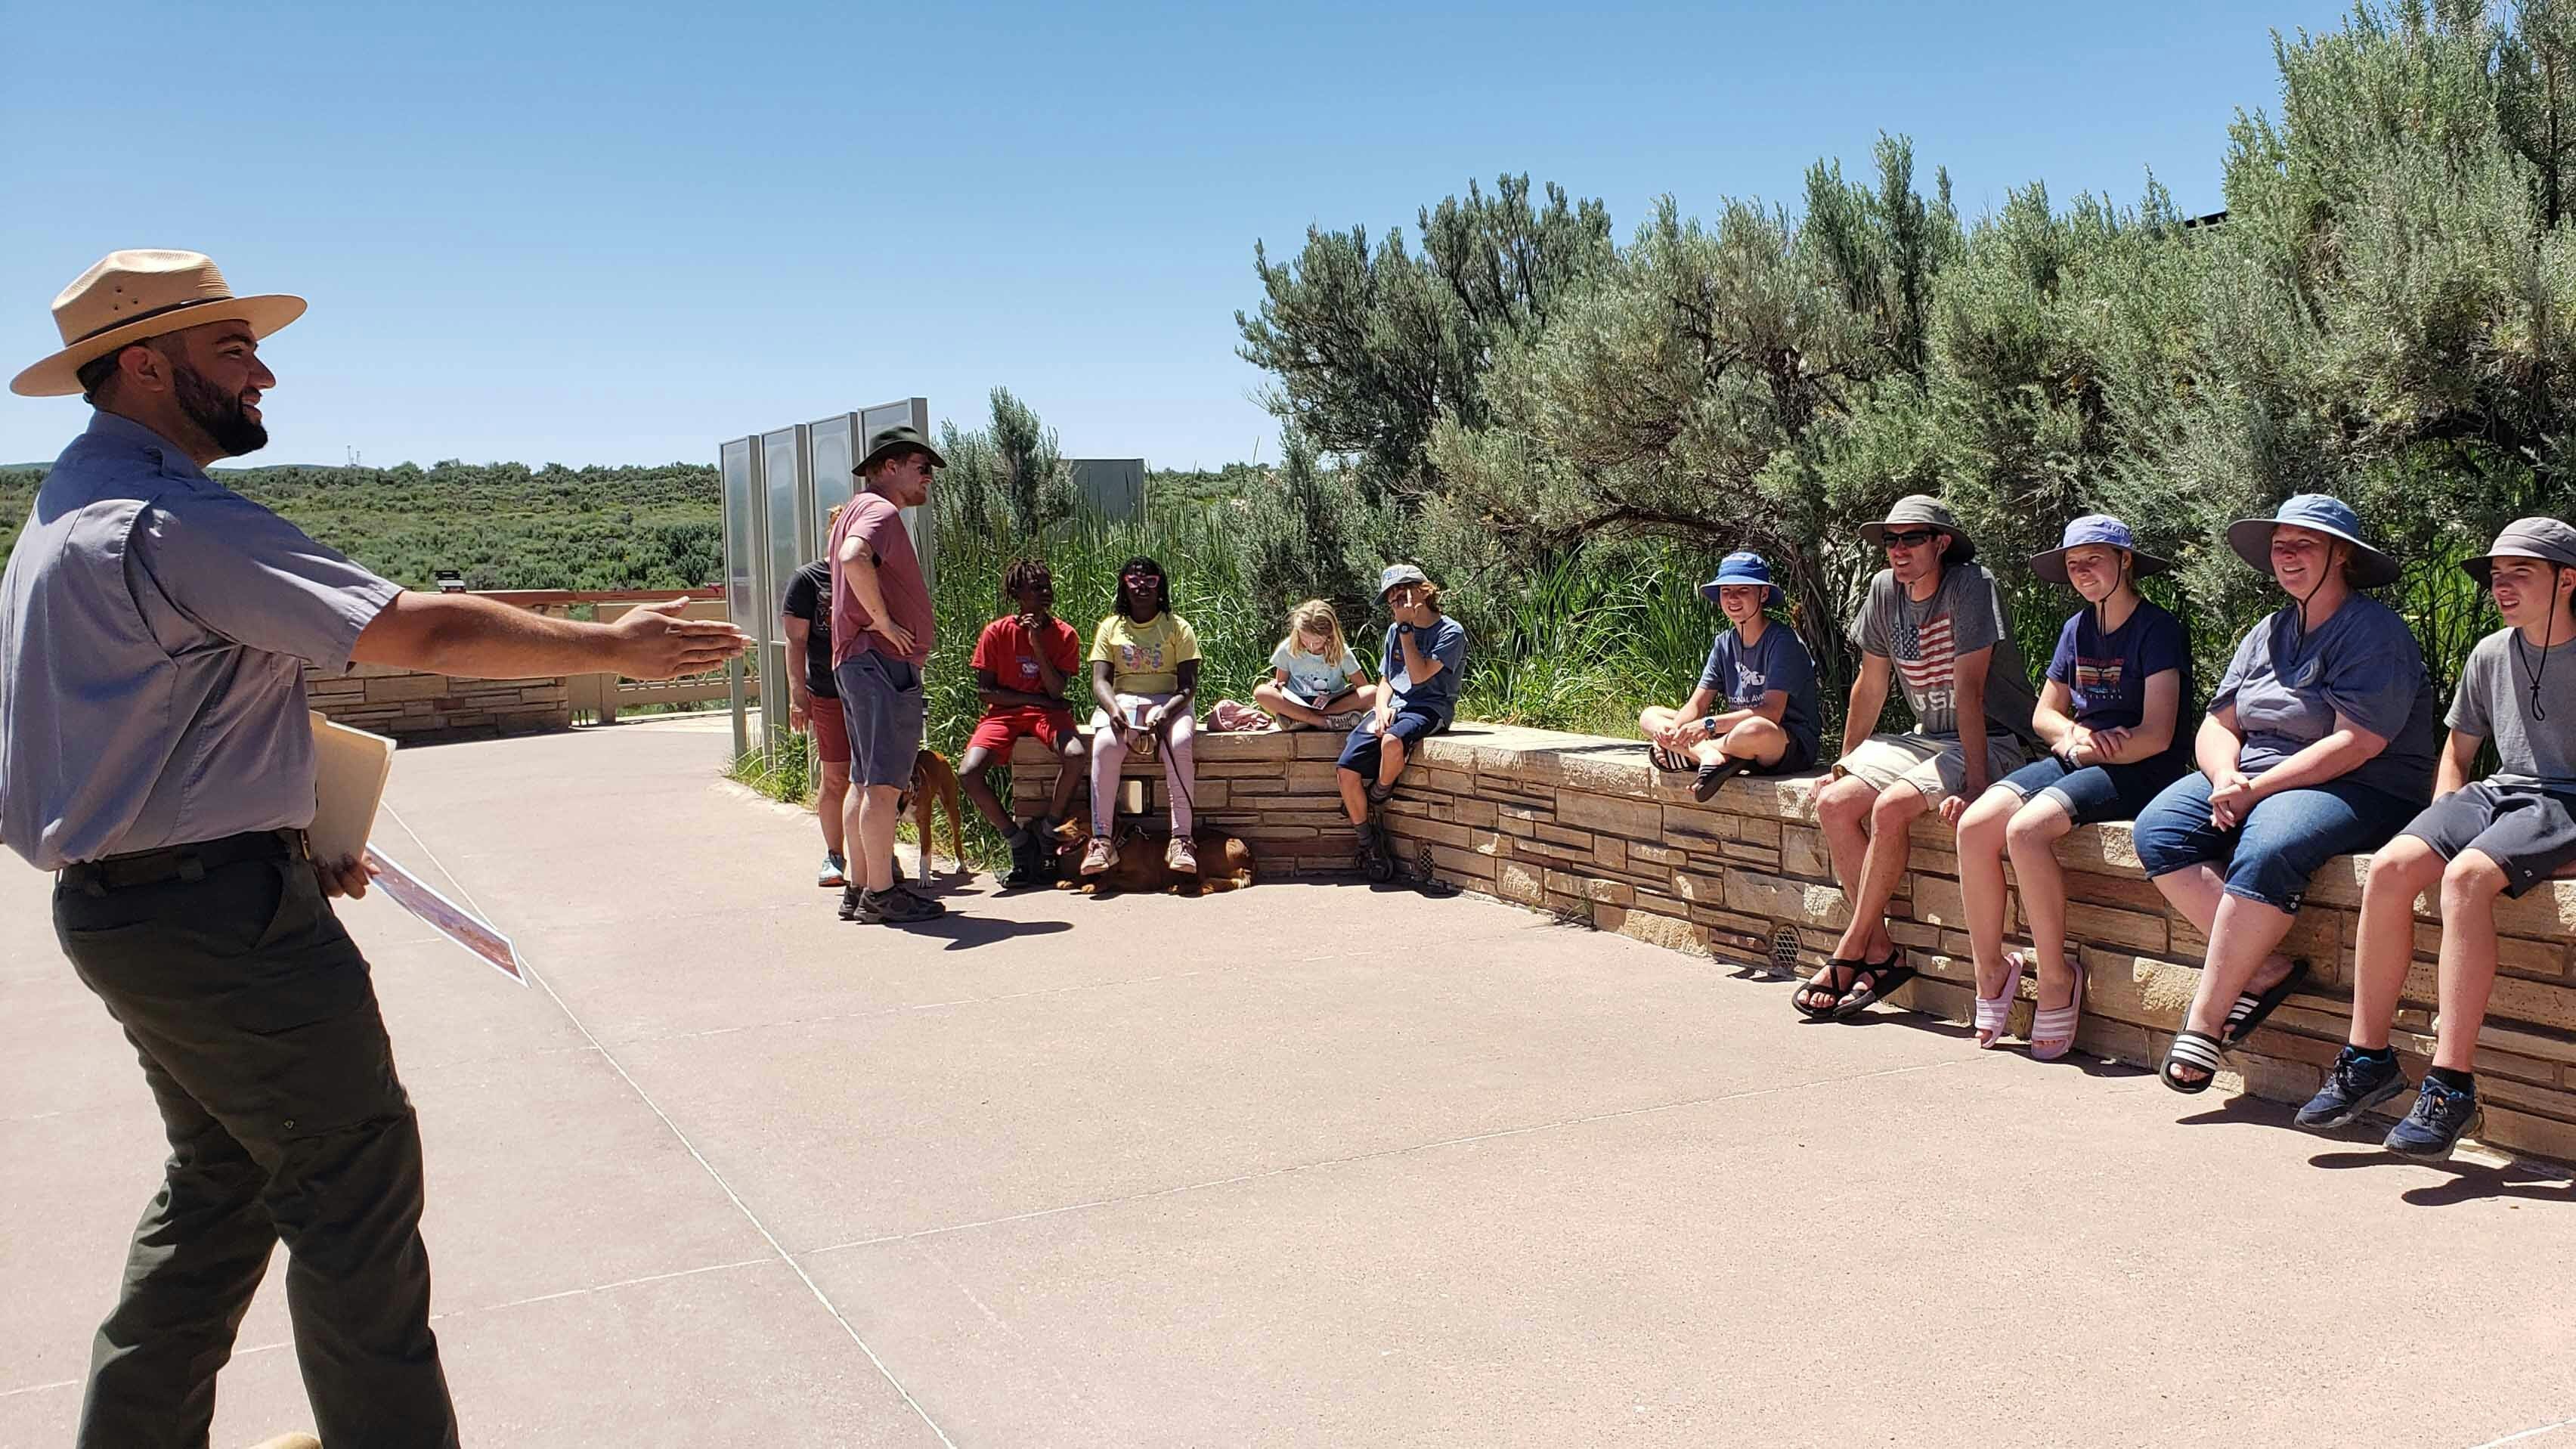 Ranger Gaetano Palazzo gives an entomology talk to visitors to Fossil Butte National Monument